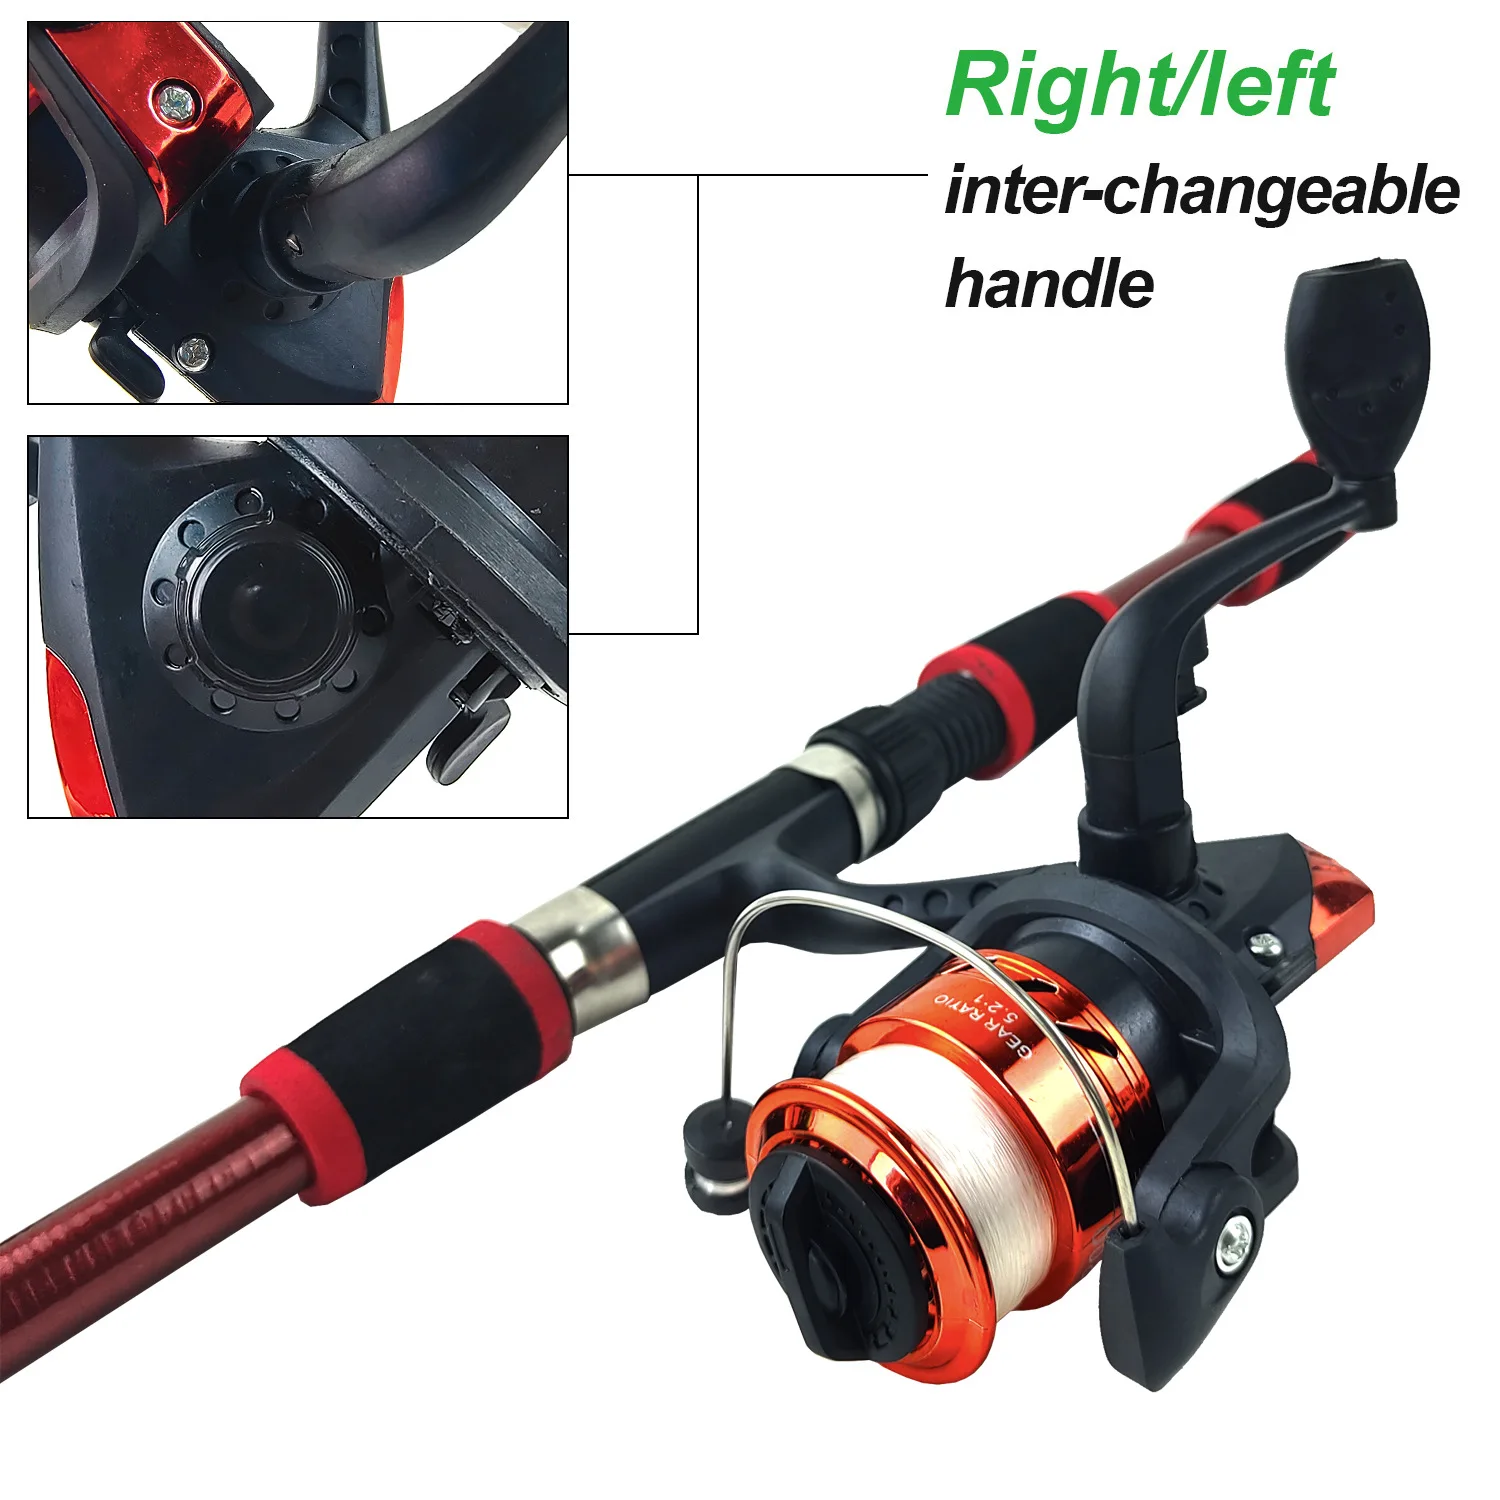 https://ae01.alicdn.com/kf/S8e461afb1c1b46a4a9ba3801c1c9c7c4s/Fishing-Pole-Combo-Spinning-Rod-And-Reel-For-Men-Telescopic-Fishing-Pole-And-Spinning-Reels-Kit.jpg